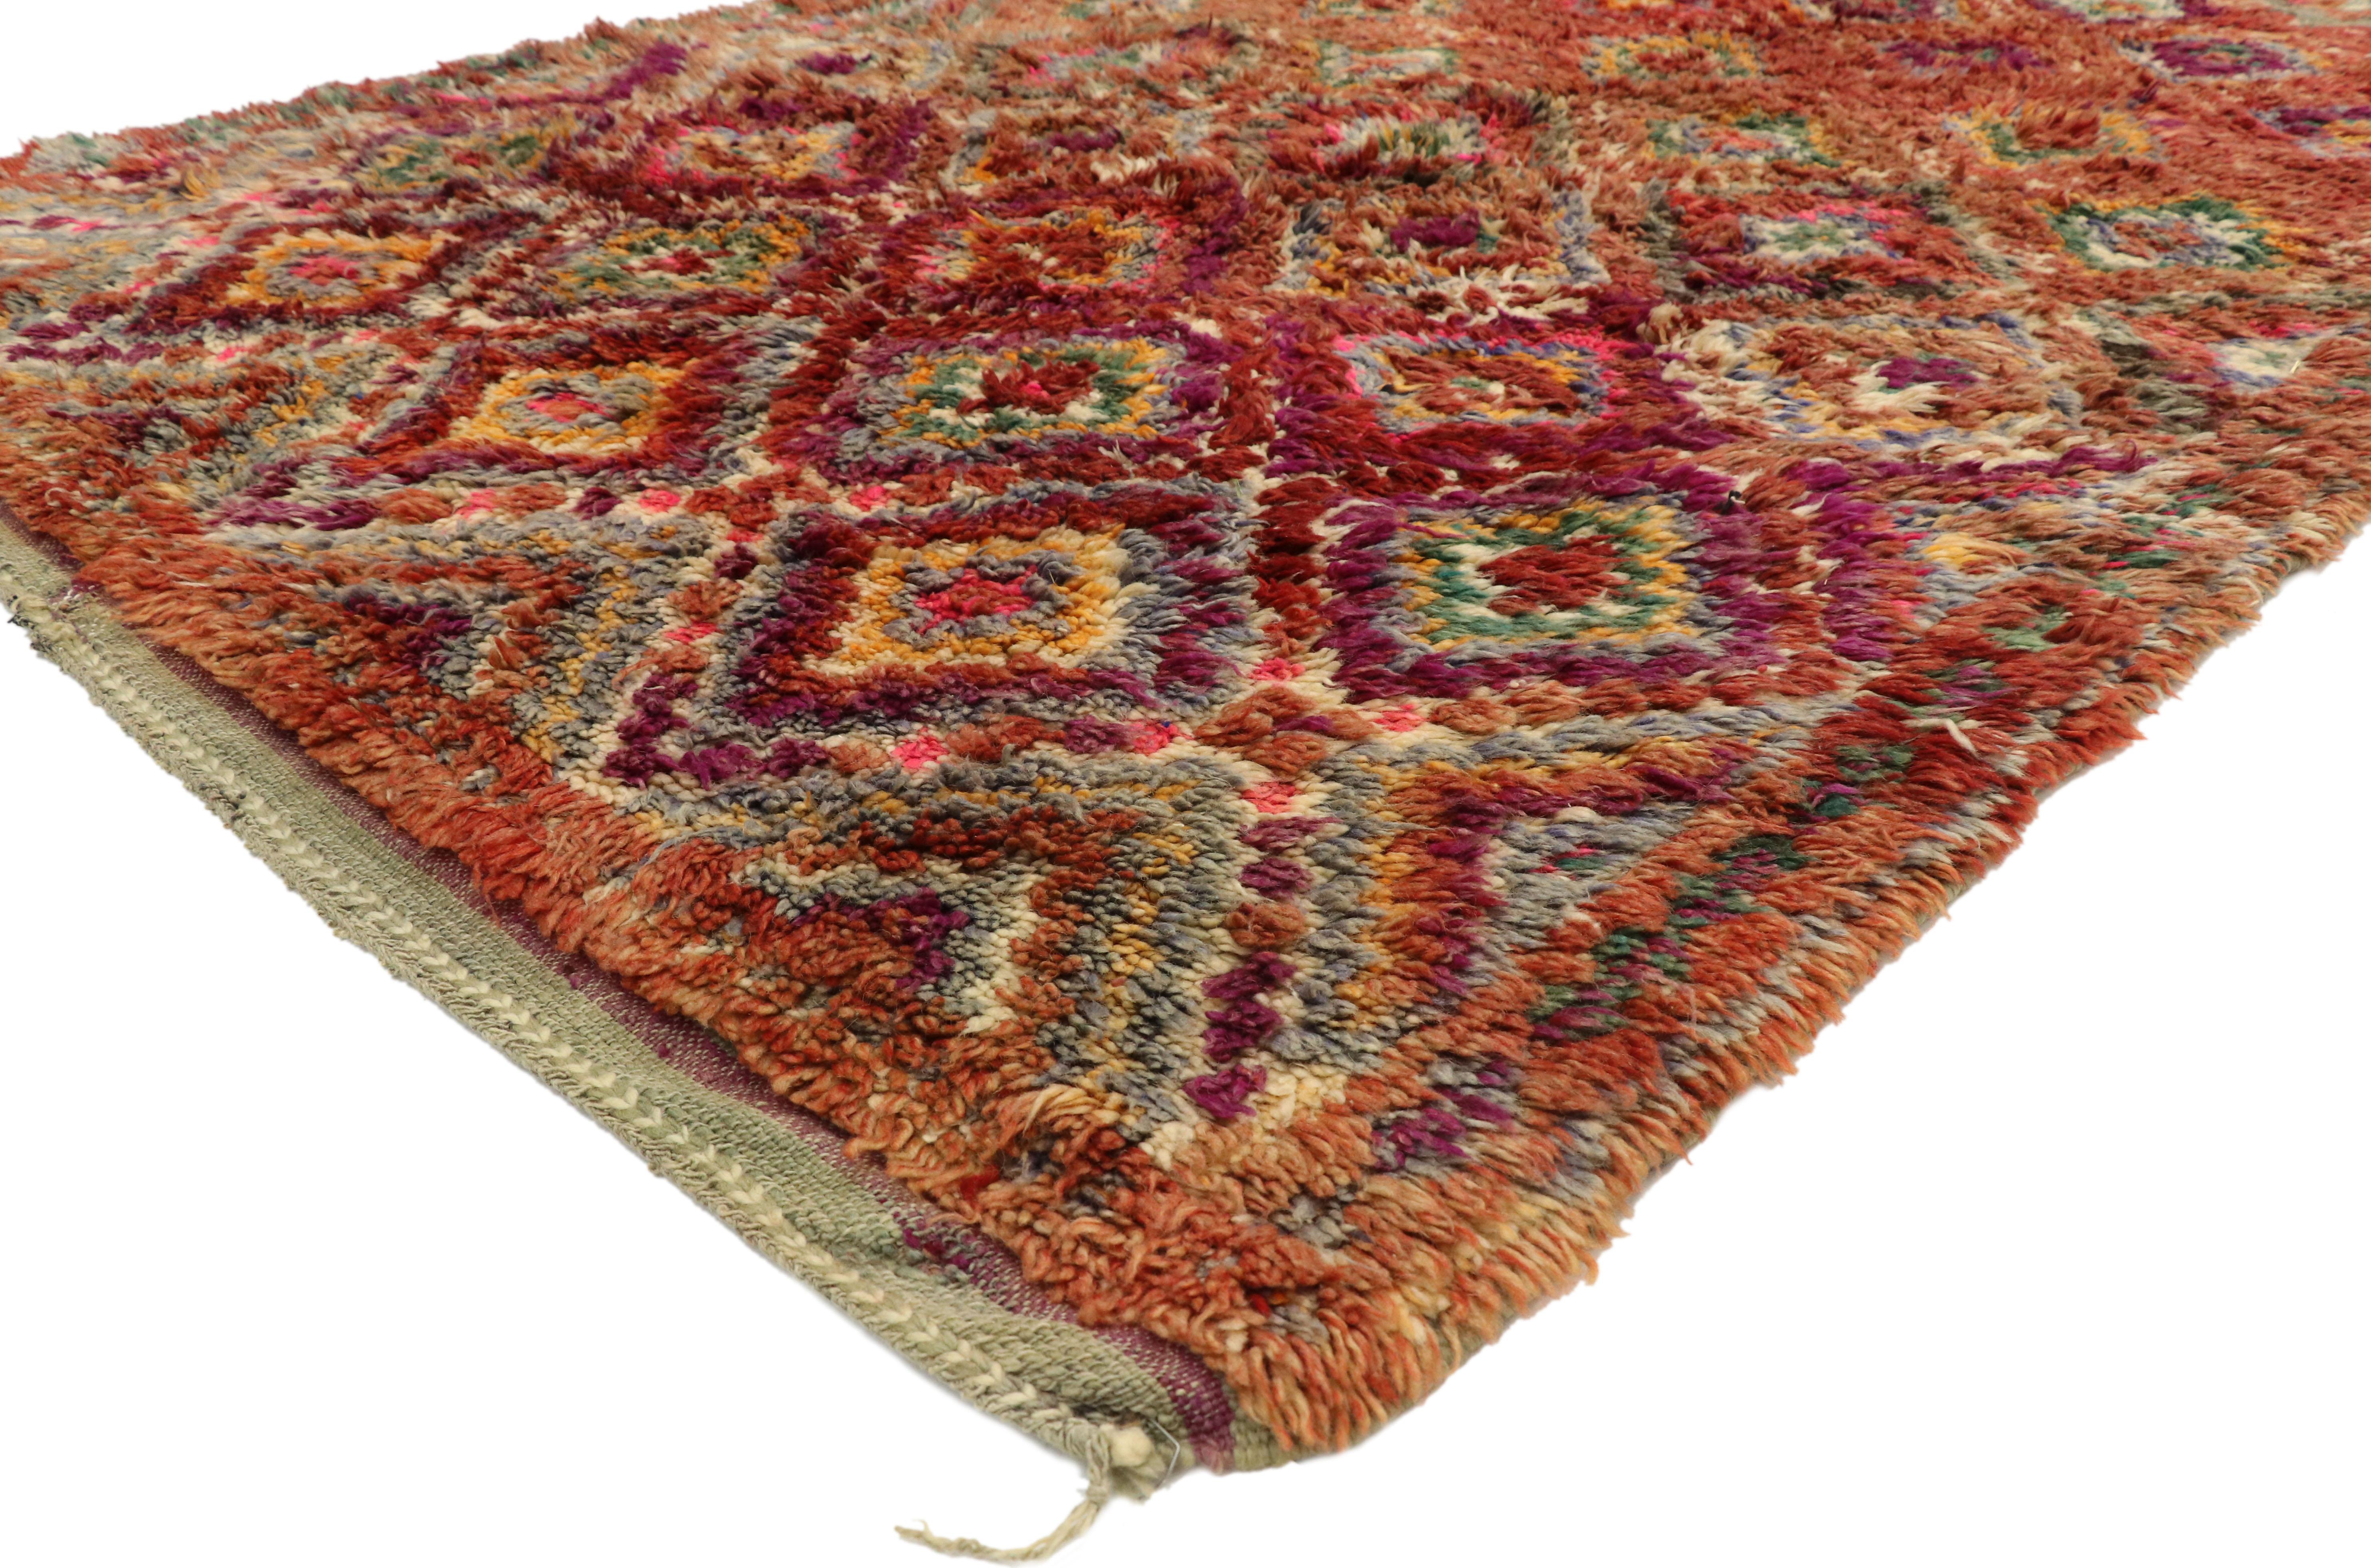 21014, vintage Taznakht Moroccan rug with diamond pattern and Mid-Century Modern style. This hand knotted wool vintage Berber Taznakht Moroccan rug features an all-over diamond lattice pattern composed of concentric diamonds. Like an endless